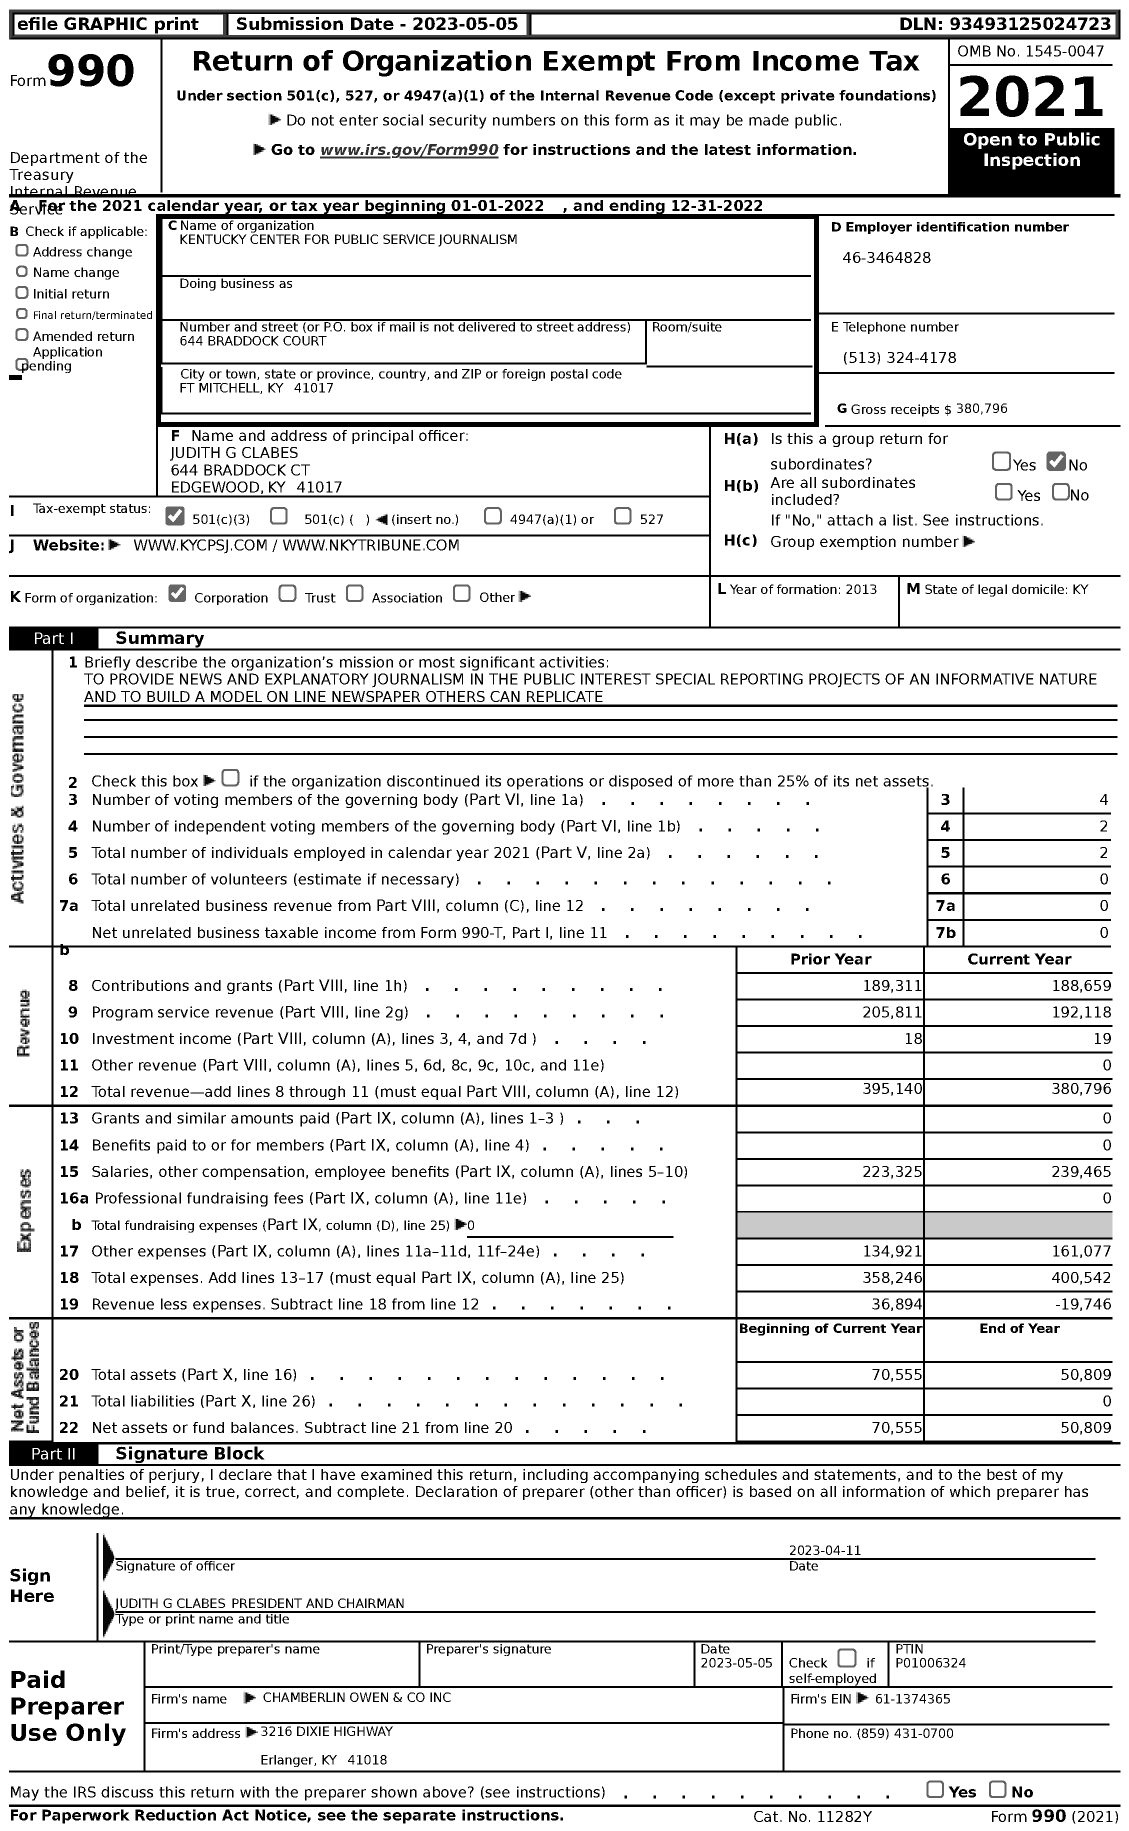 Image of first page of 2022 Form 990 for Kentucky Center for Public Service Journalism